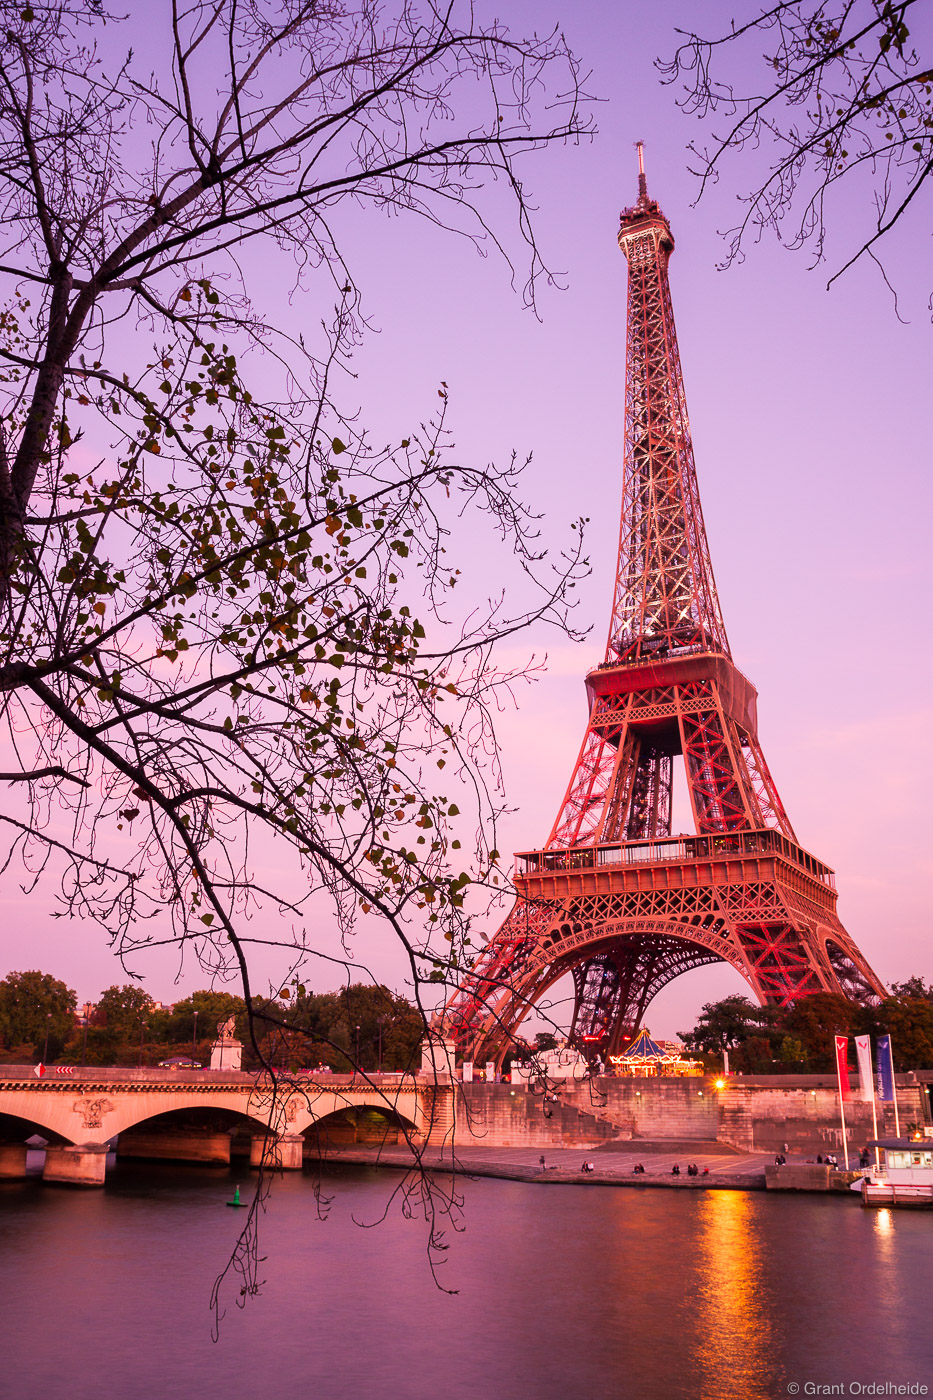 One of&nbsp;the most recognized landmarks in the world reflected in the Seine river.